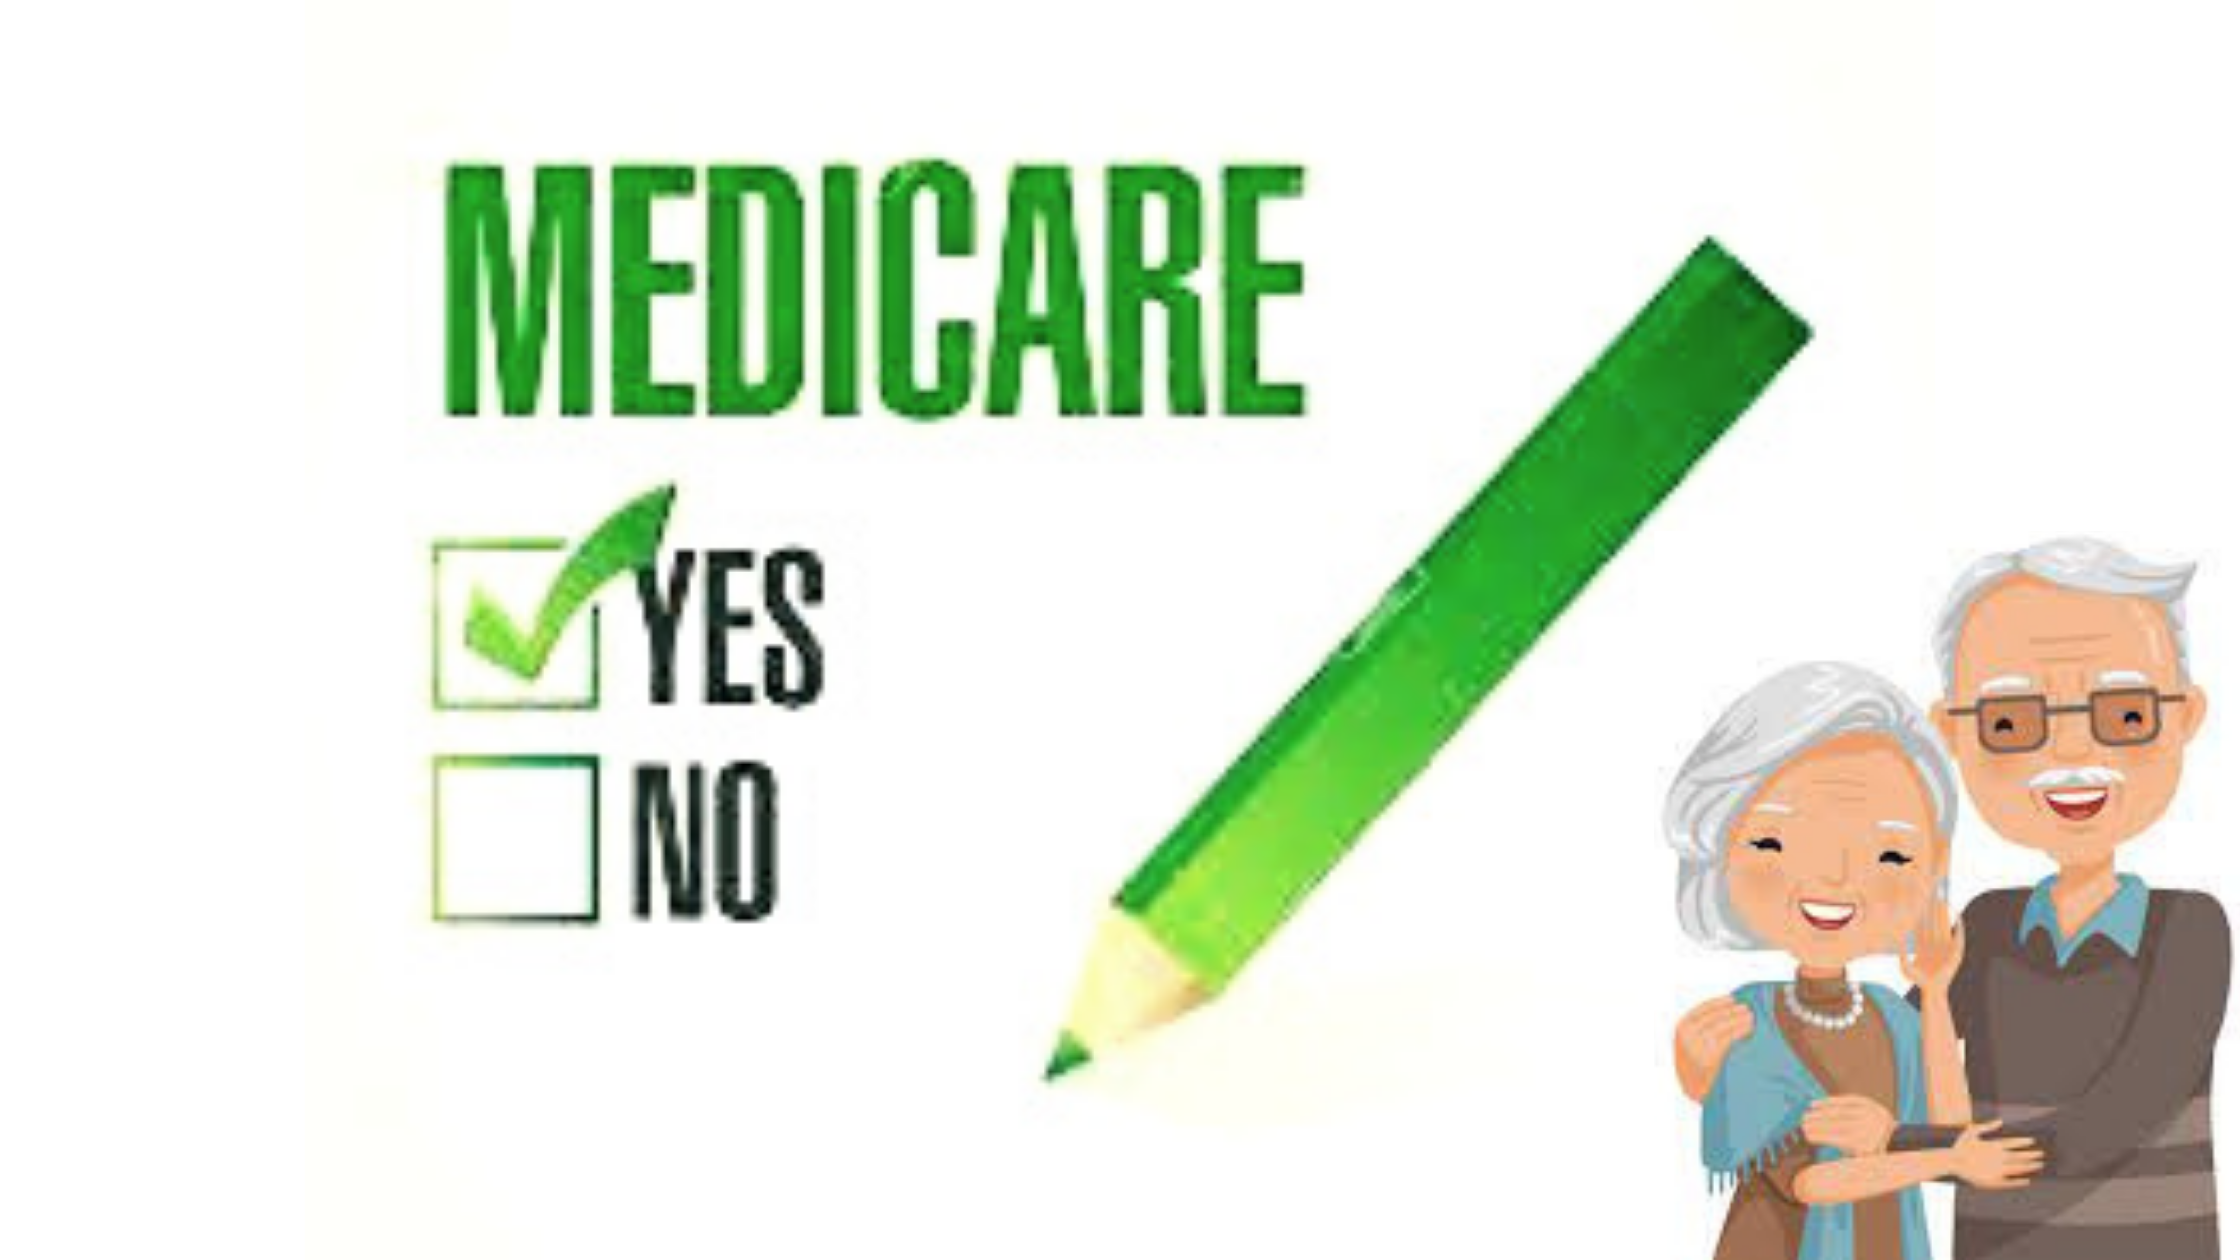 Medicare check yes stock image